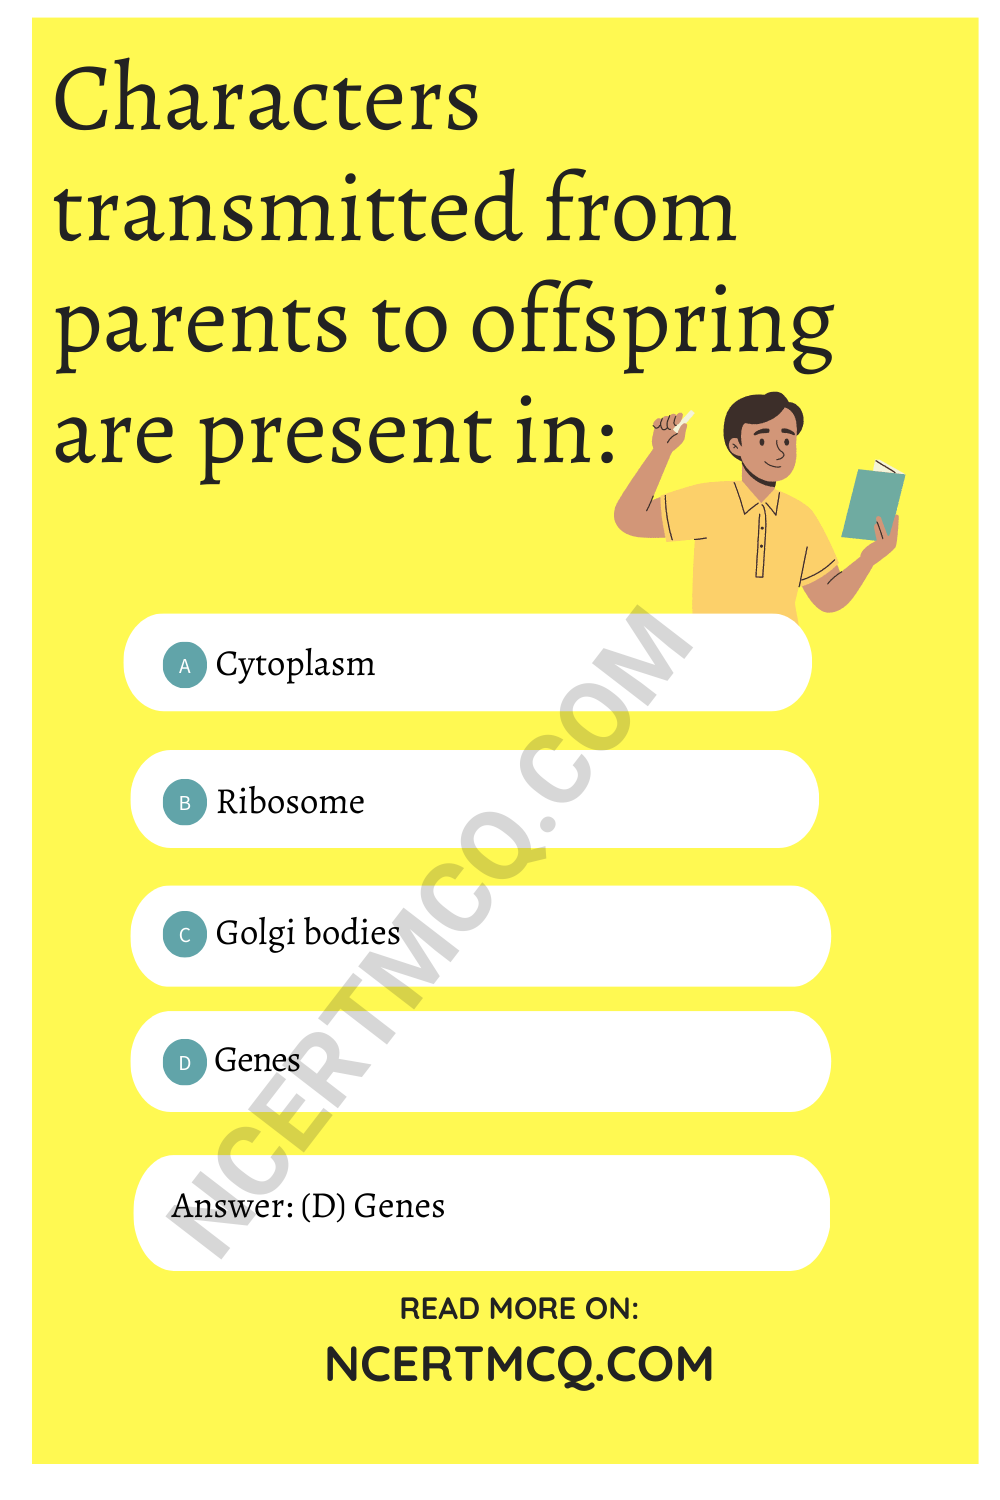 Characters transmitted from parents to offspring are present in: